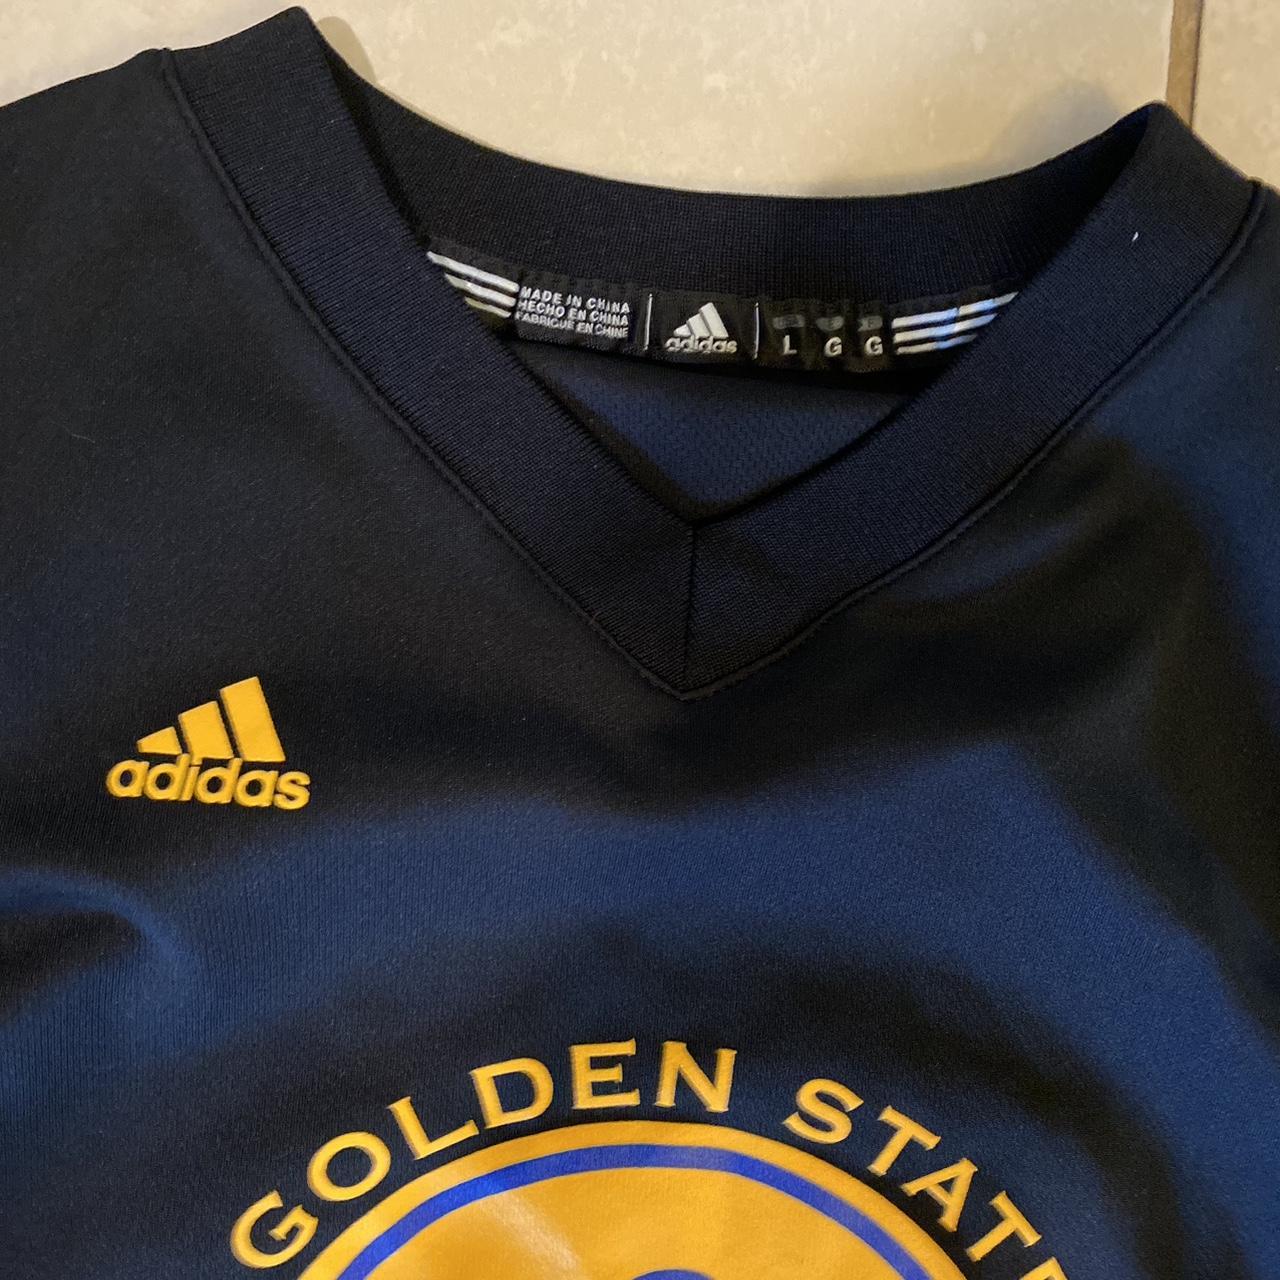 Adidas Steph Curry Jersey Size Large (Fits xs-small - Depop